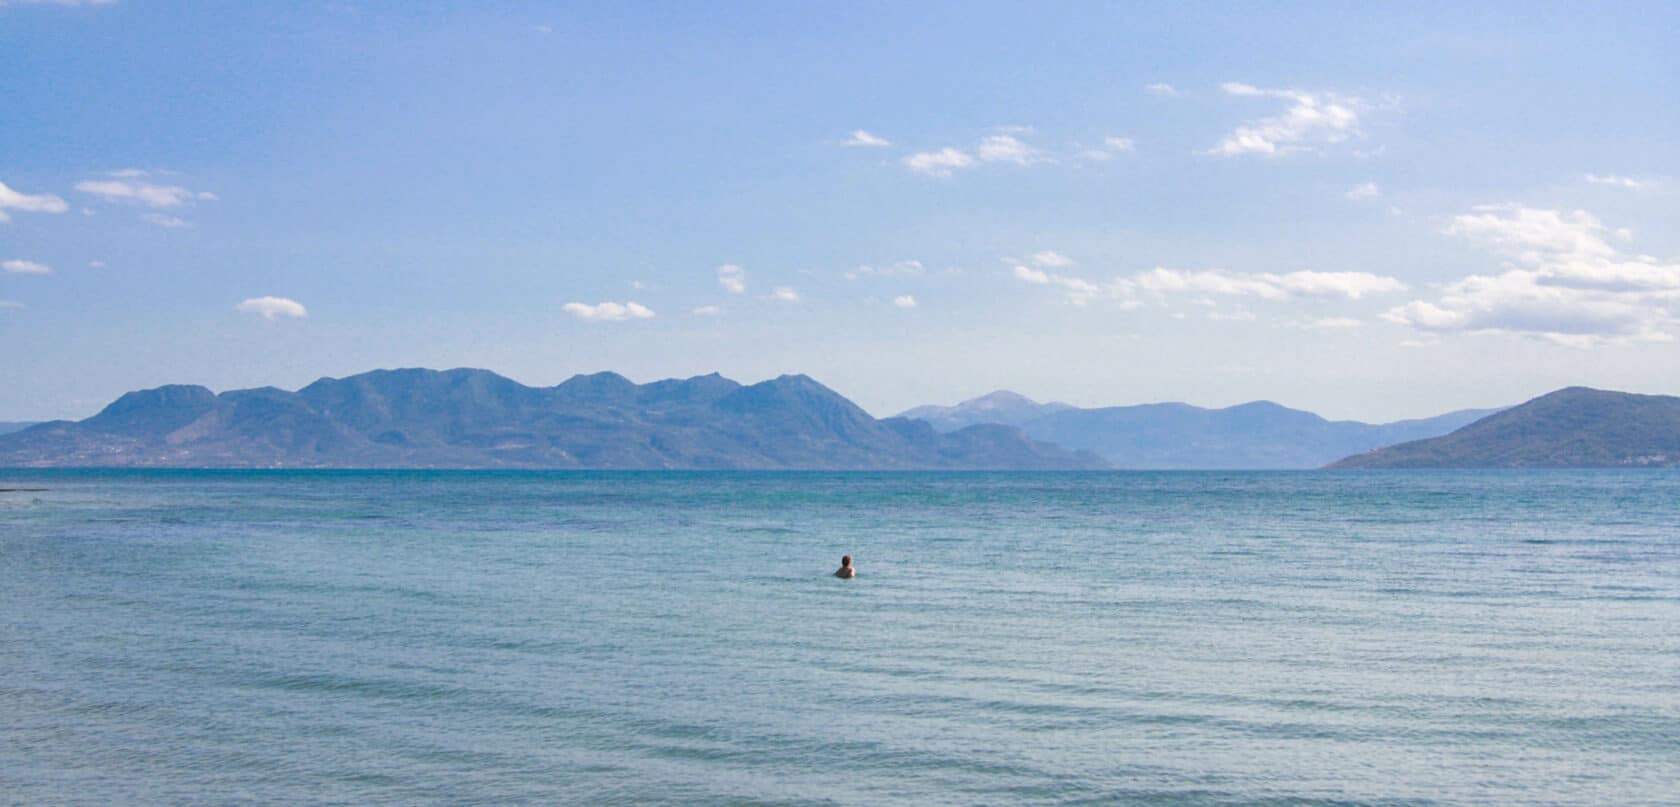 A view of the ocean with mountains in the background.